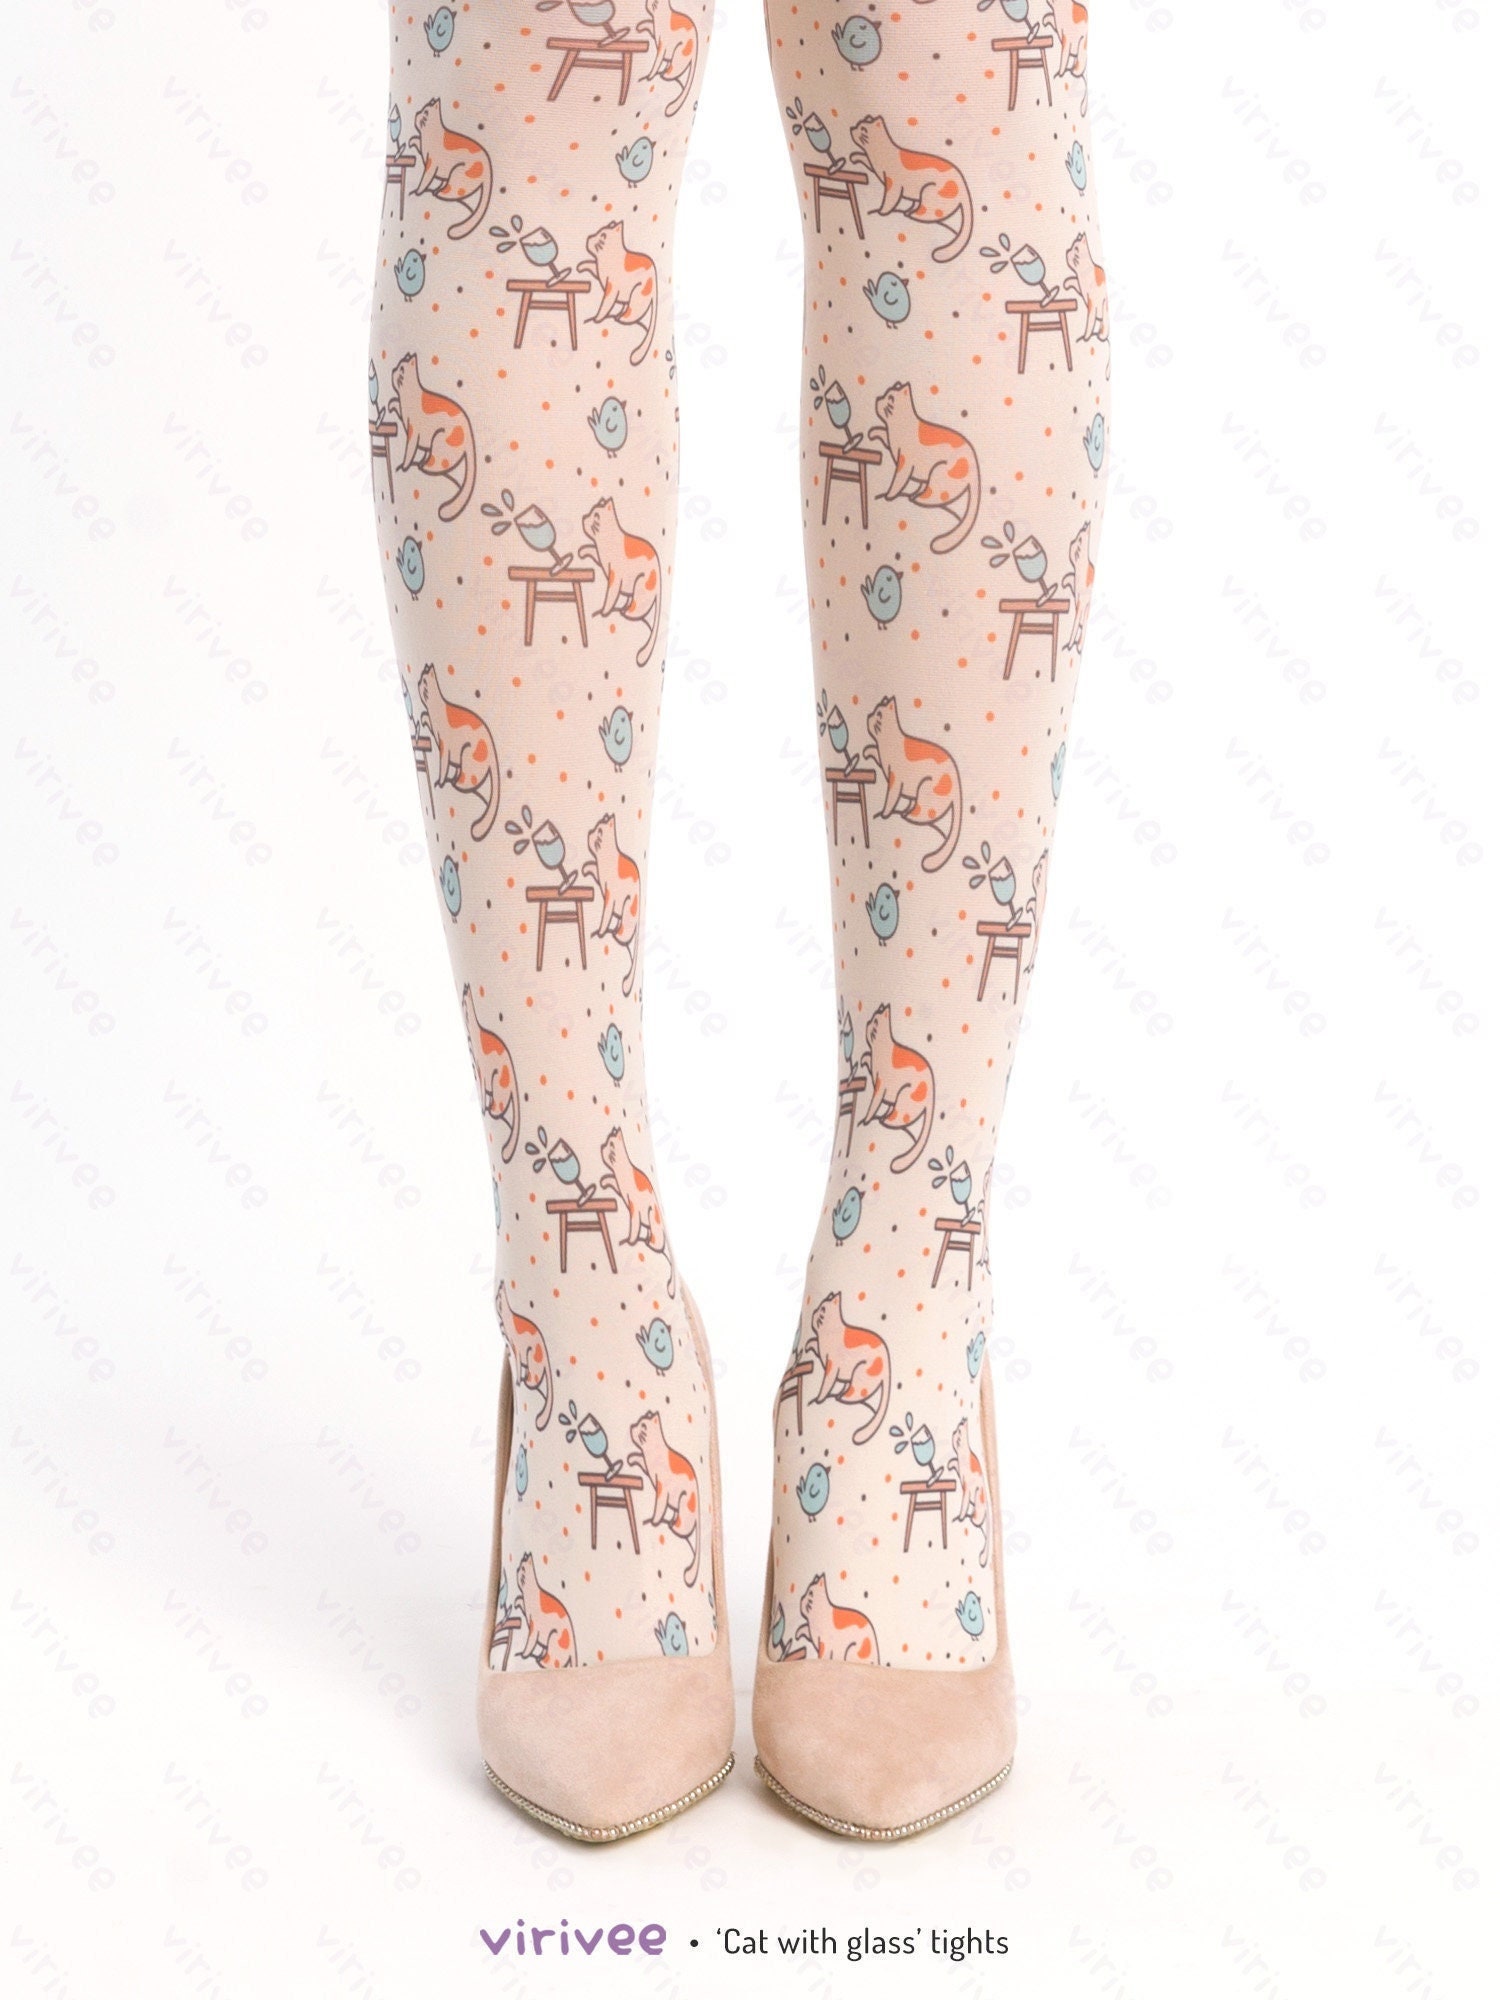 Floral tights - Virivee Tights - Unique tights designed and made